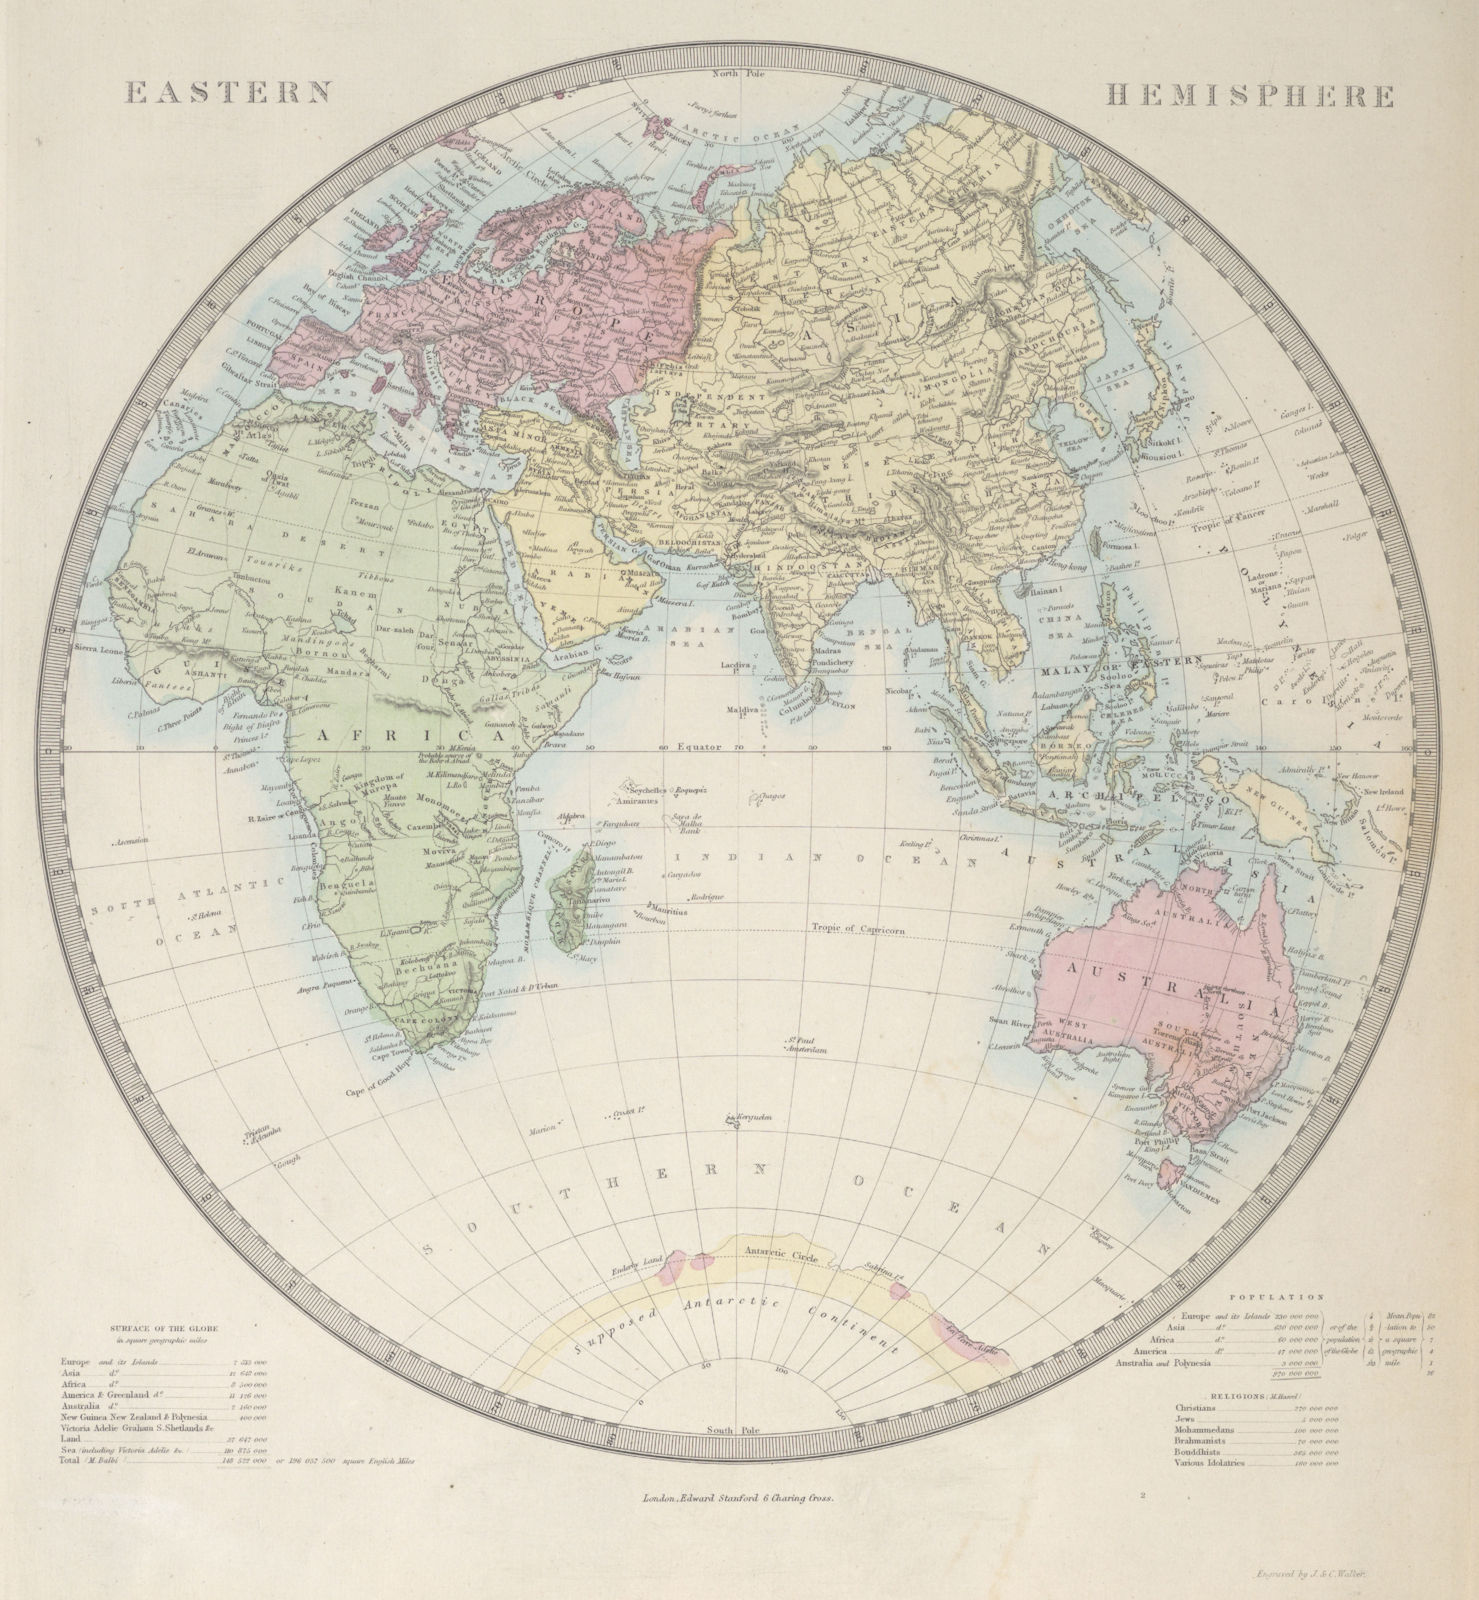 EASTERN HEMISPHERE Europe Africa Asia Supposed Antarctic Continent SDUK 1857 map